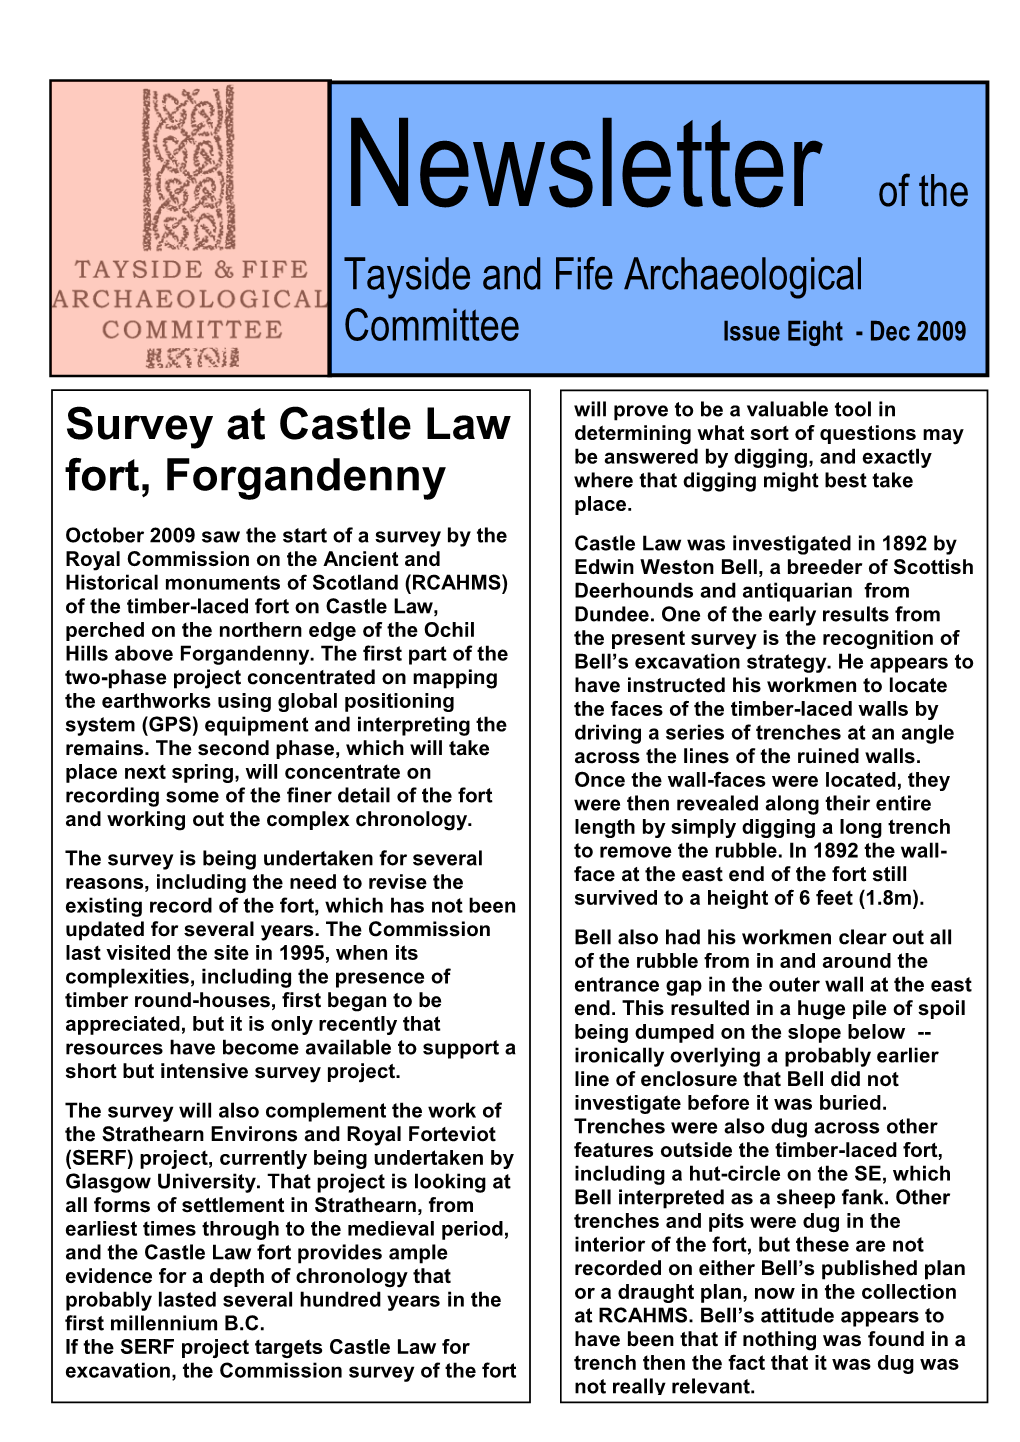 Tayside and Fife Archaeological Survey at Castle Law Fort